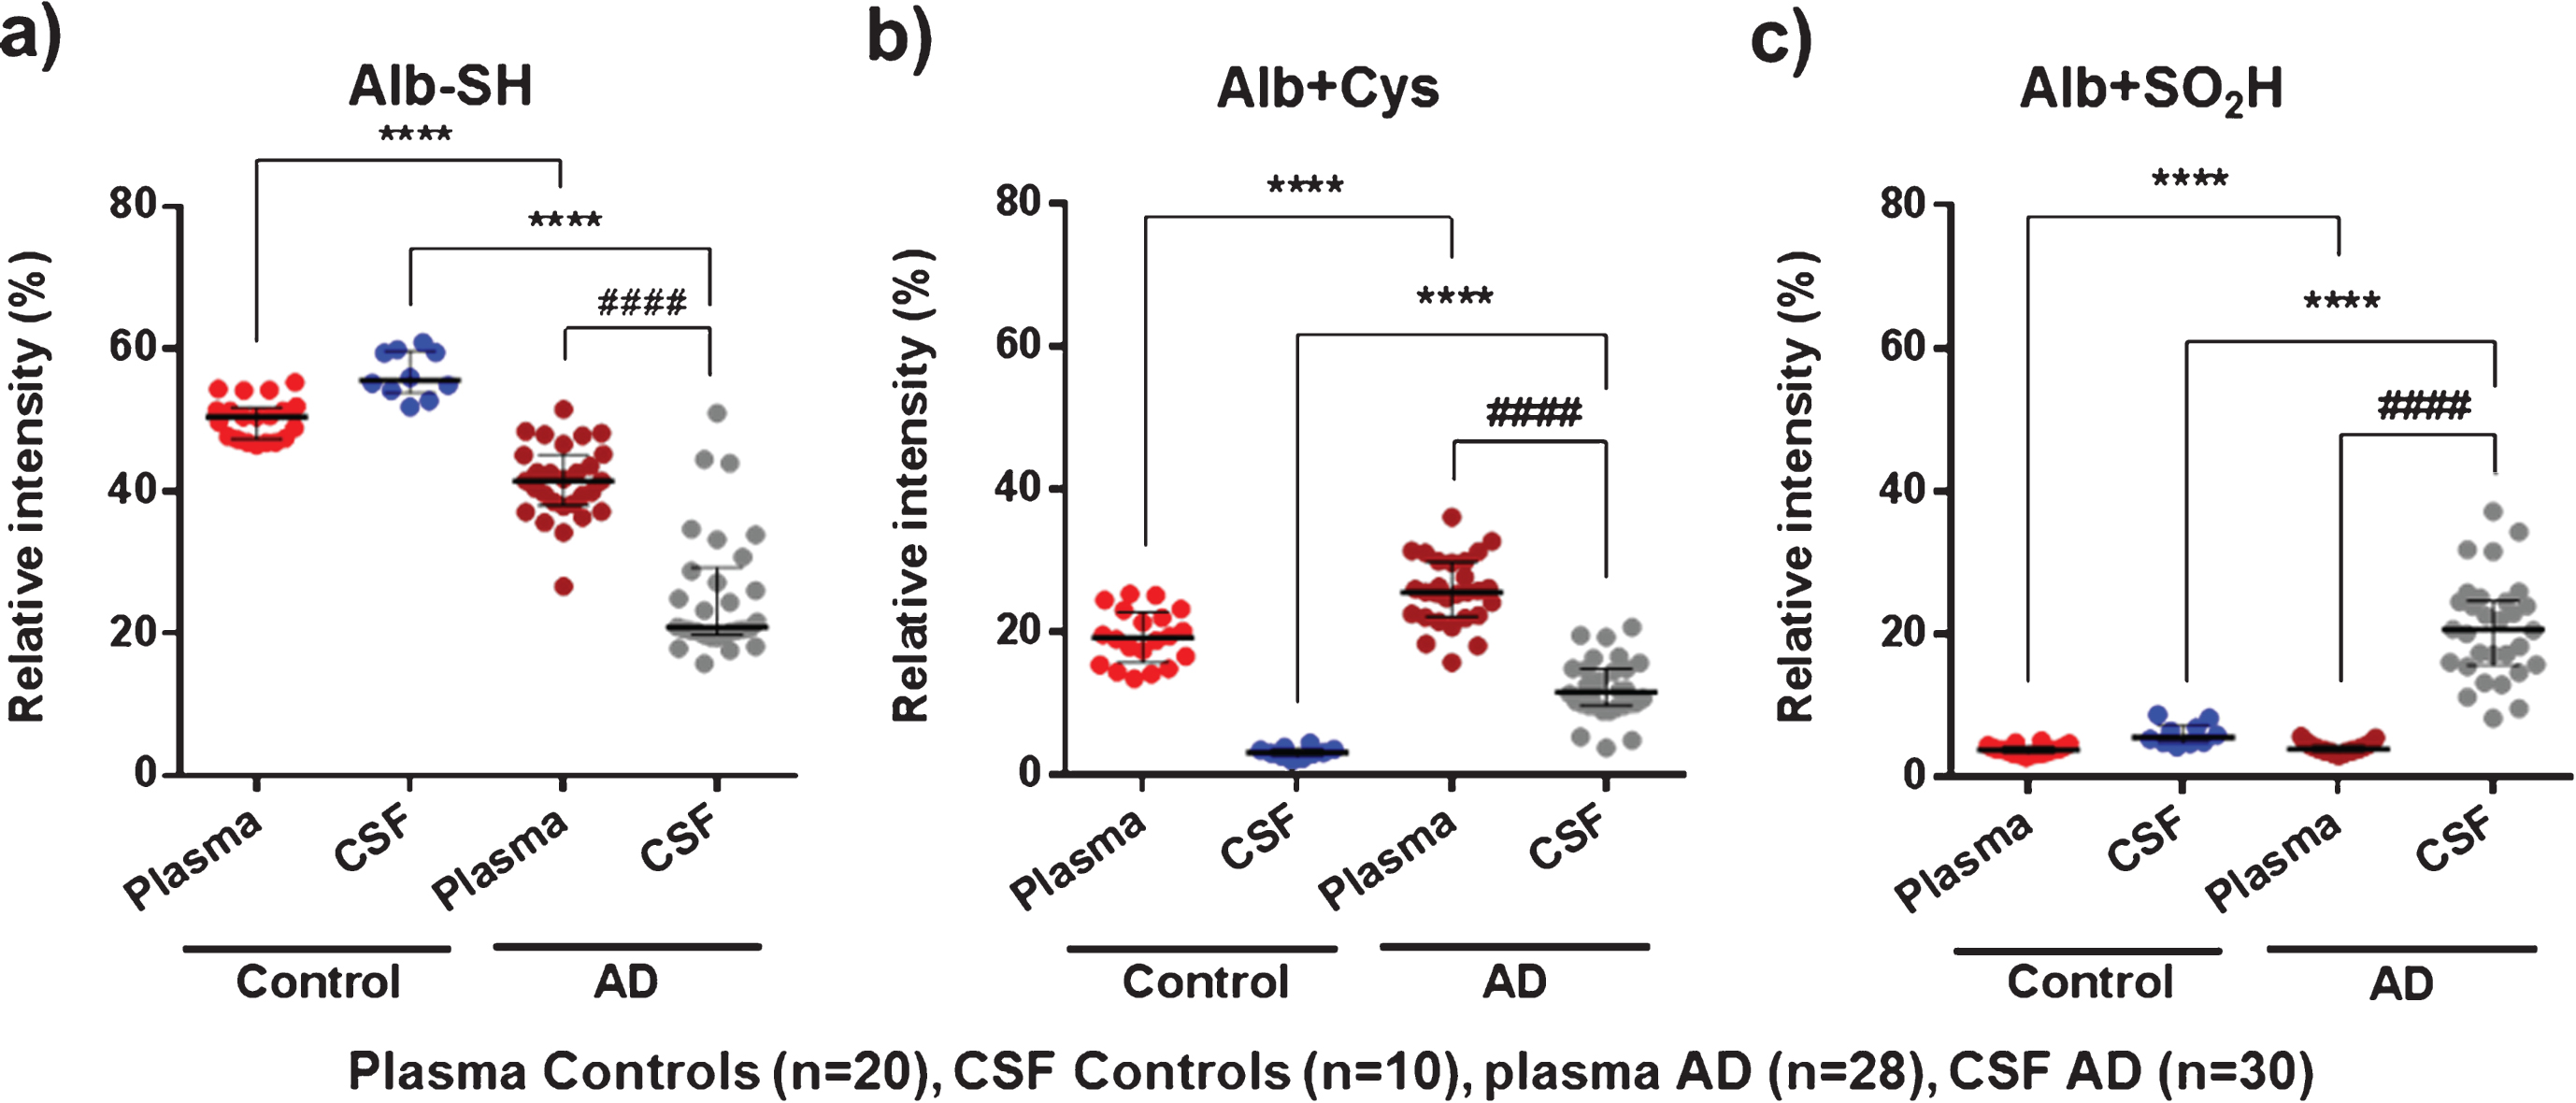 MS results of representative albumin oxidation forms (Alb-SH, Alb+Cys, and Alb+SO2H) in plasma and cerebrospinal fluid (CSF) from controls (healthy age-matched donors) and Alzheimer’s disease (AD) patients. The subfigures show relative intensities (% ) of the native albumin (Alb-SH) (a), the cysteinylation of the Cys34 residue (Alb+Cys) (b), and sulfinylation of the Cys34 residue (Alb+SO2H) (c). Data are shown as median±interquartile range. Unpaired t test: ( ****p < 0.0001; AD versus Control); Paired t test: ( # # # # p < 0.0001; AD CSF versus AD Plasma).